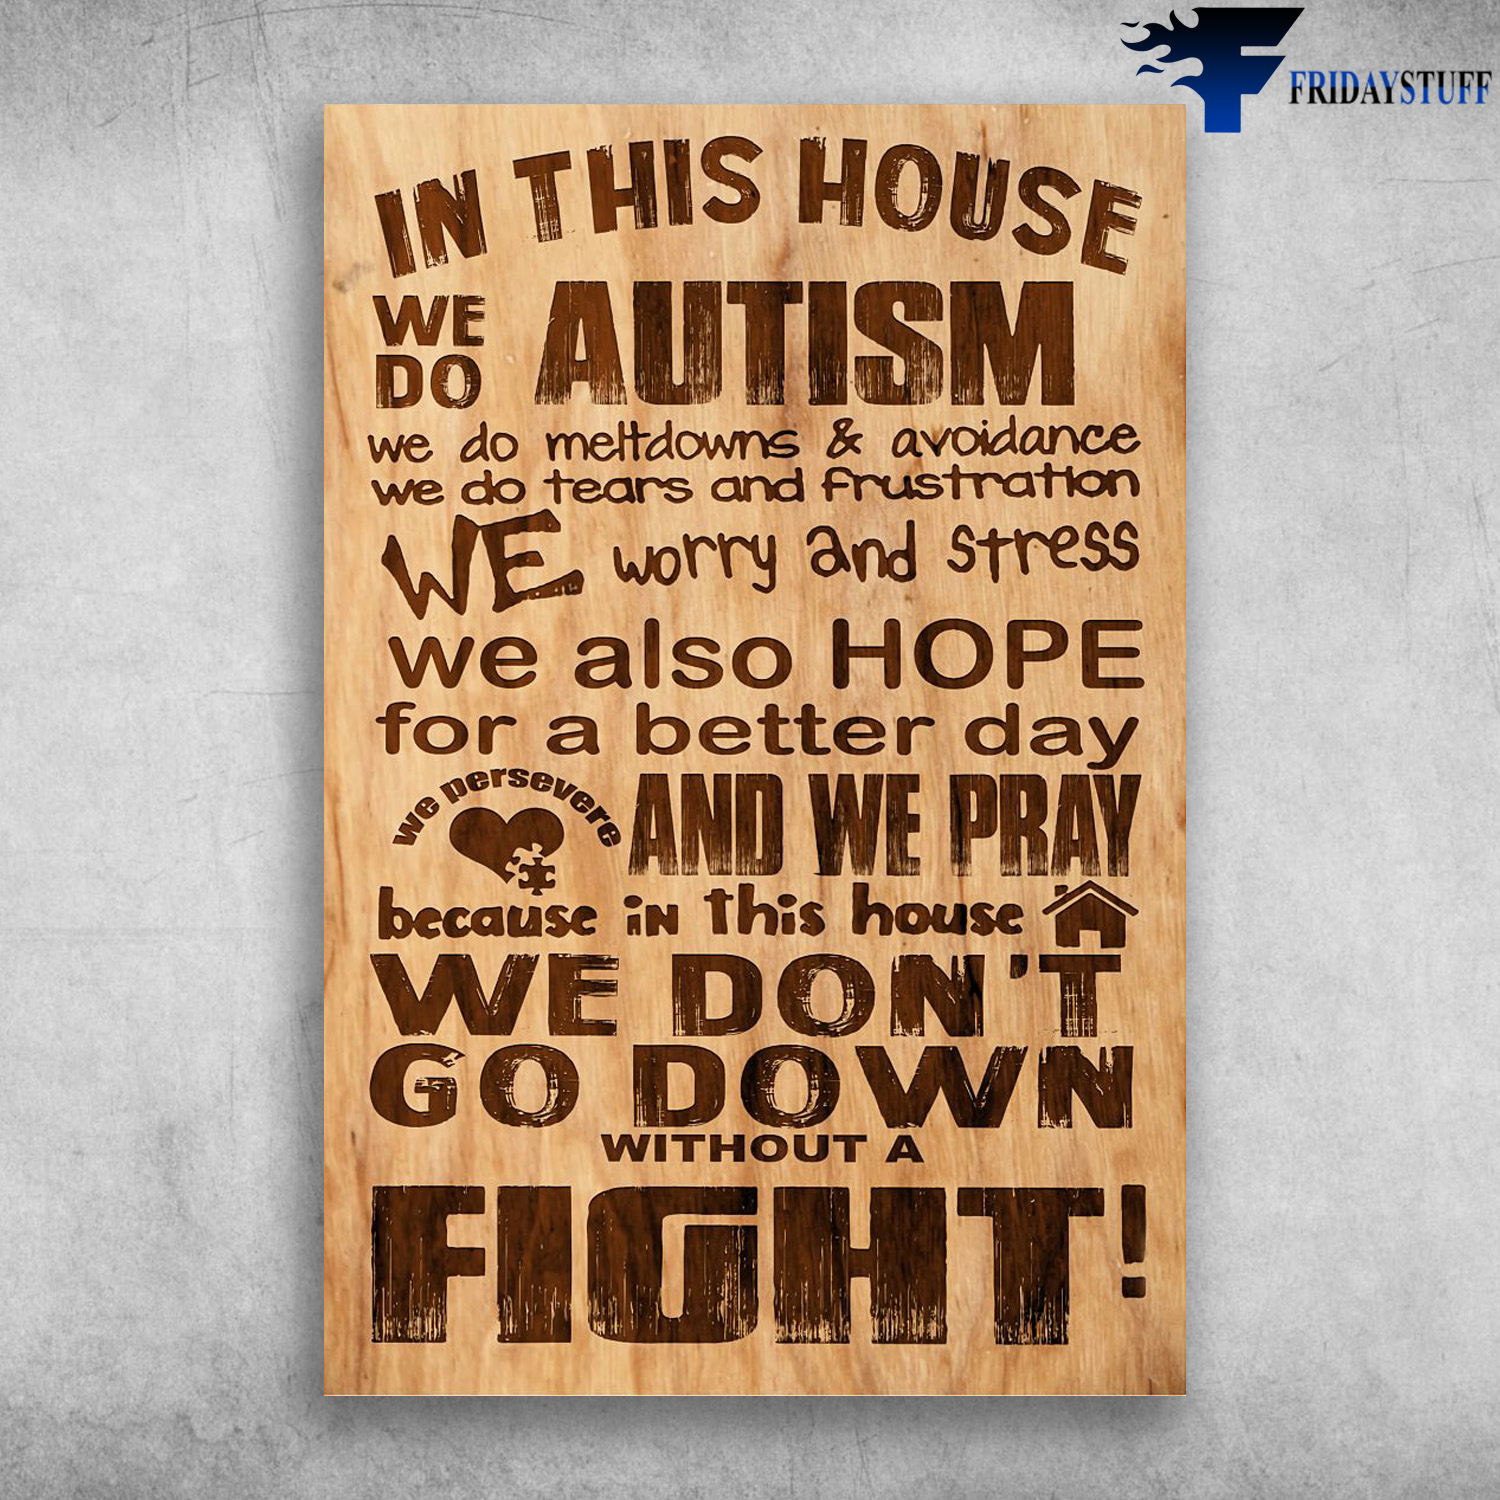 Autism - In This House, We Do Autism, We Do Meltdowns And Avoidance, We Do Tears And Frustration, We Worry And Stress, We Also Hope, For A Better Day And We Play Because In This House, We Don't Go Down, With A Fight